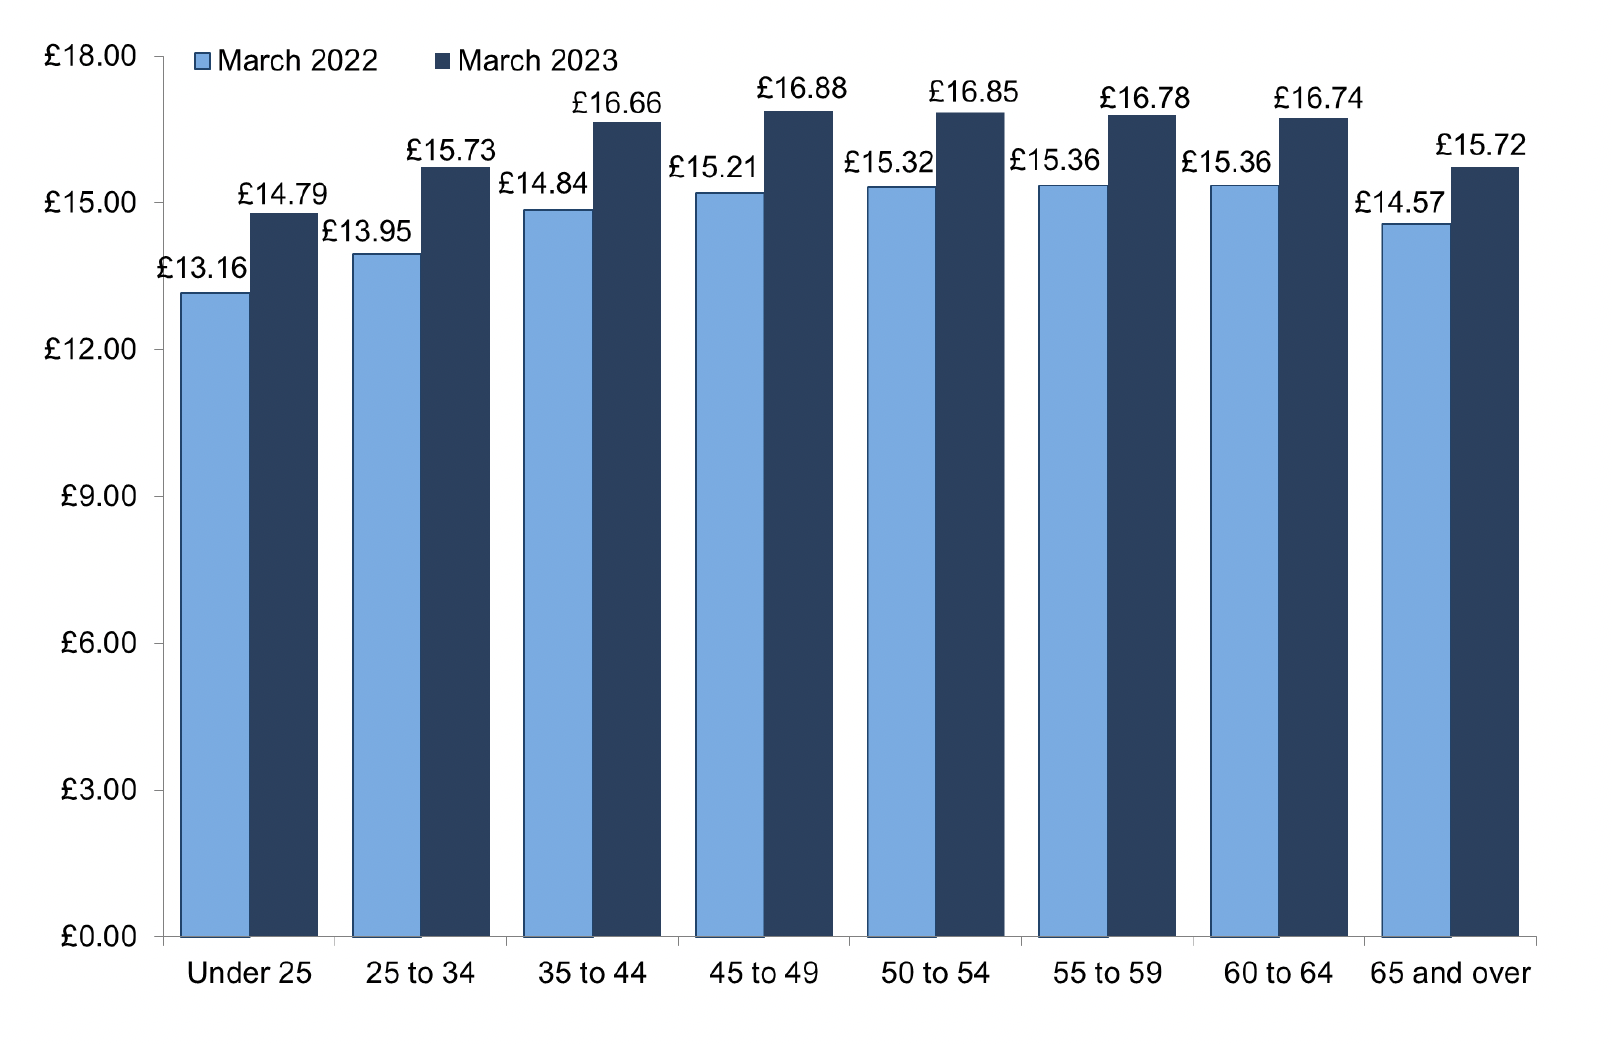 Bar chart comparing average weekly award by age group, March 2022 and March 2023